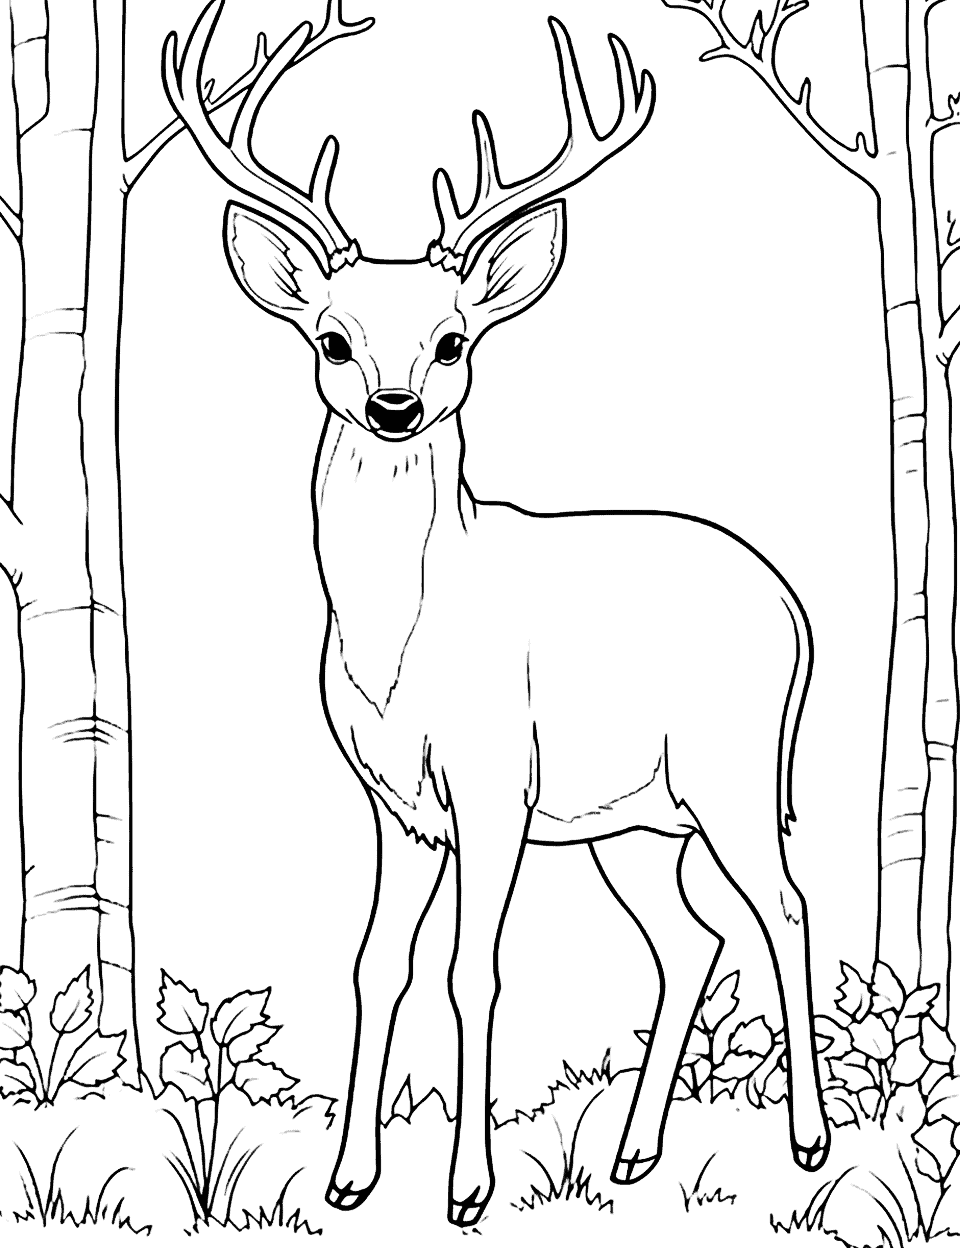 Gentle Deer Animal Coloring Page - A gentle deer standing gracefully in a serene forest clearing.